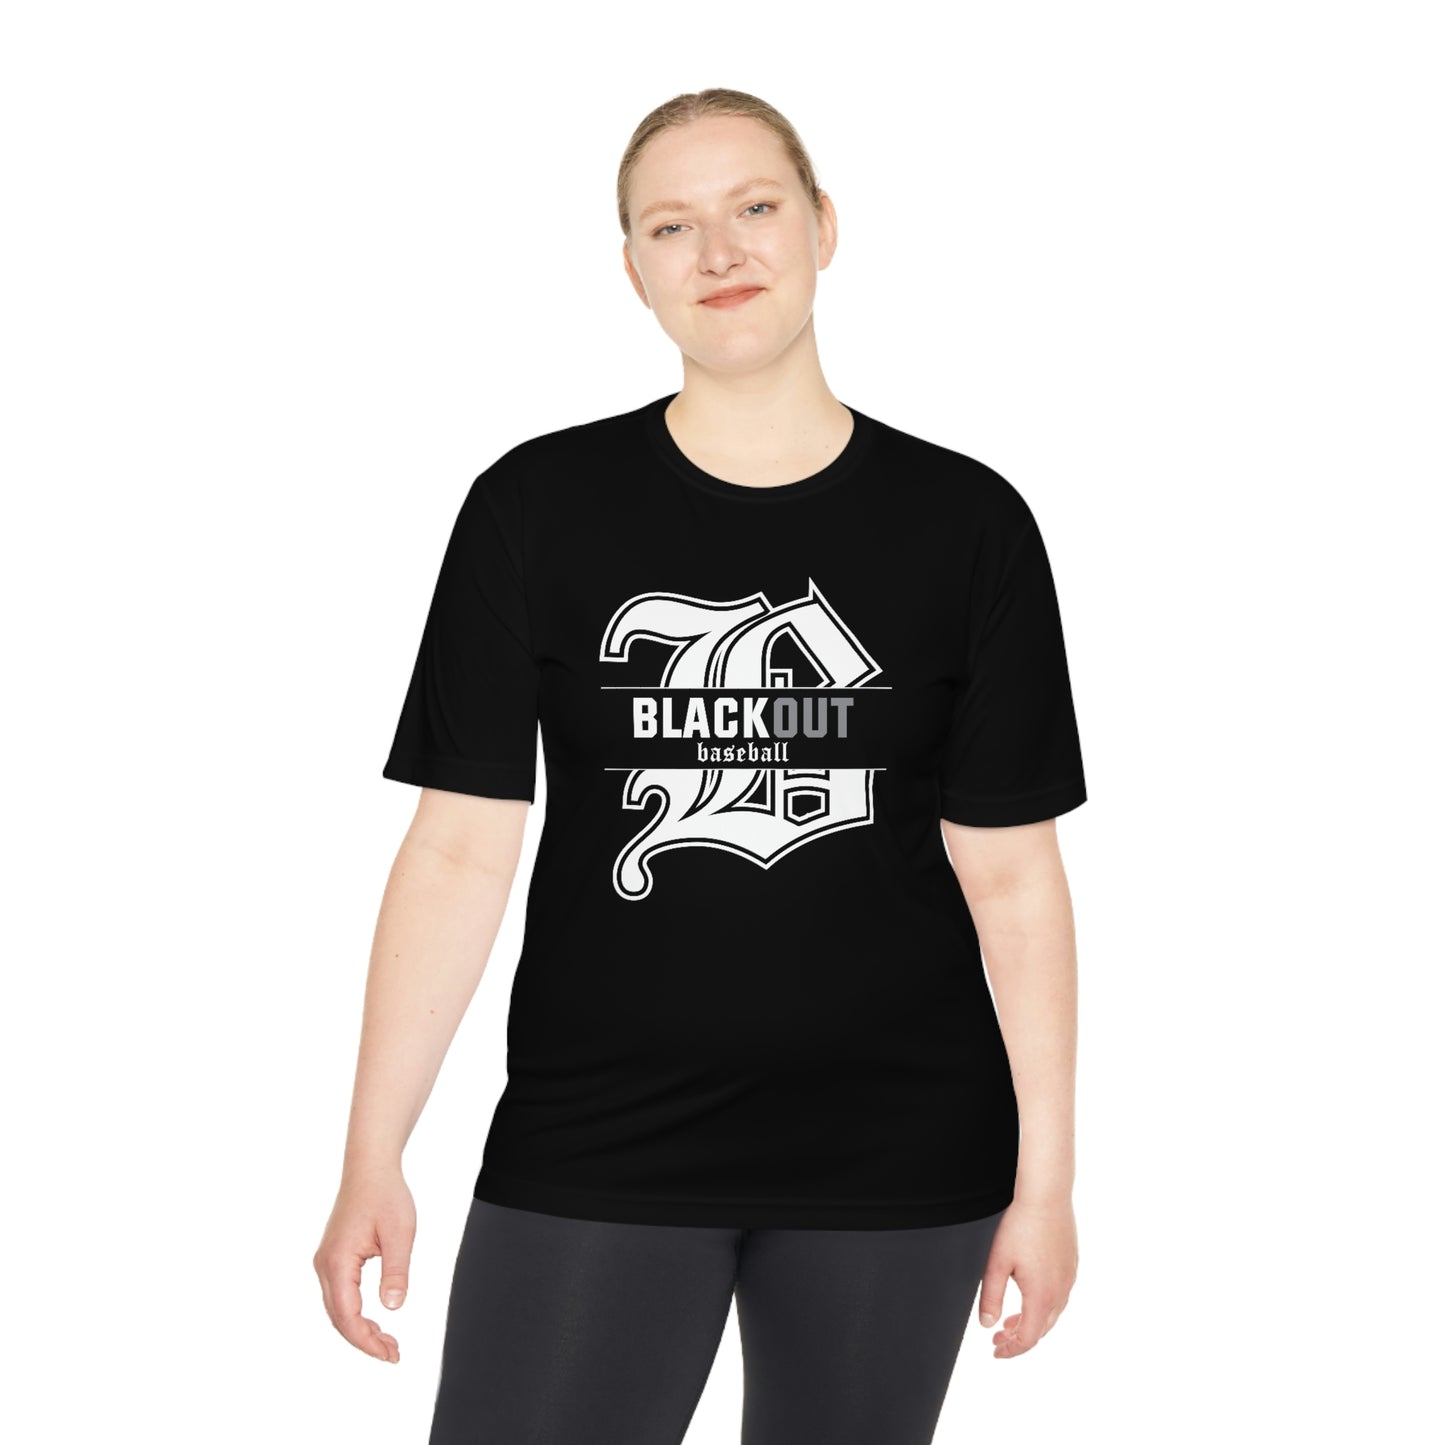 ADULT - PERSONALIZED Name - "Blackout Baseball" Moisture-Wicking T-Shirt - (Black, White, or Gray)